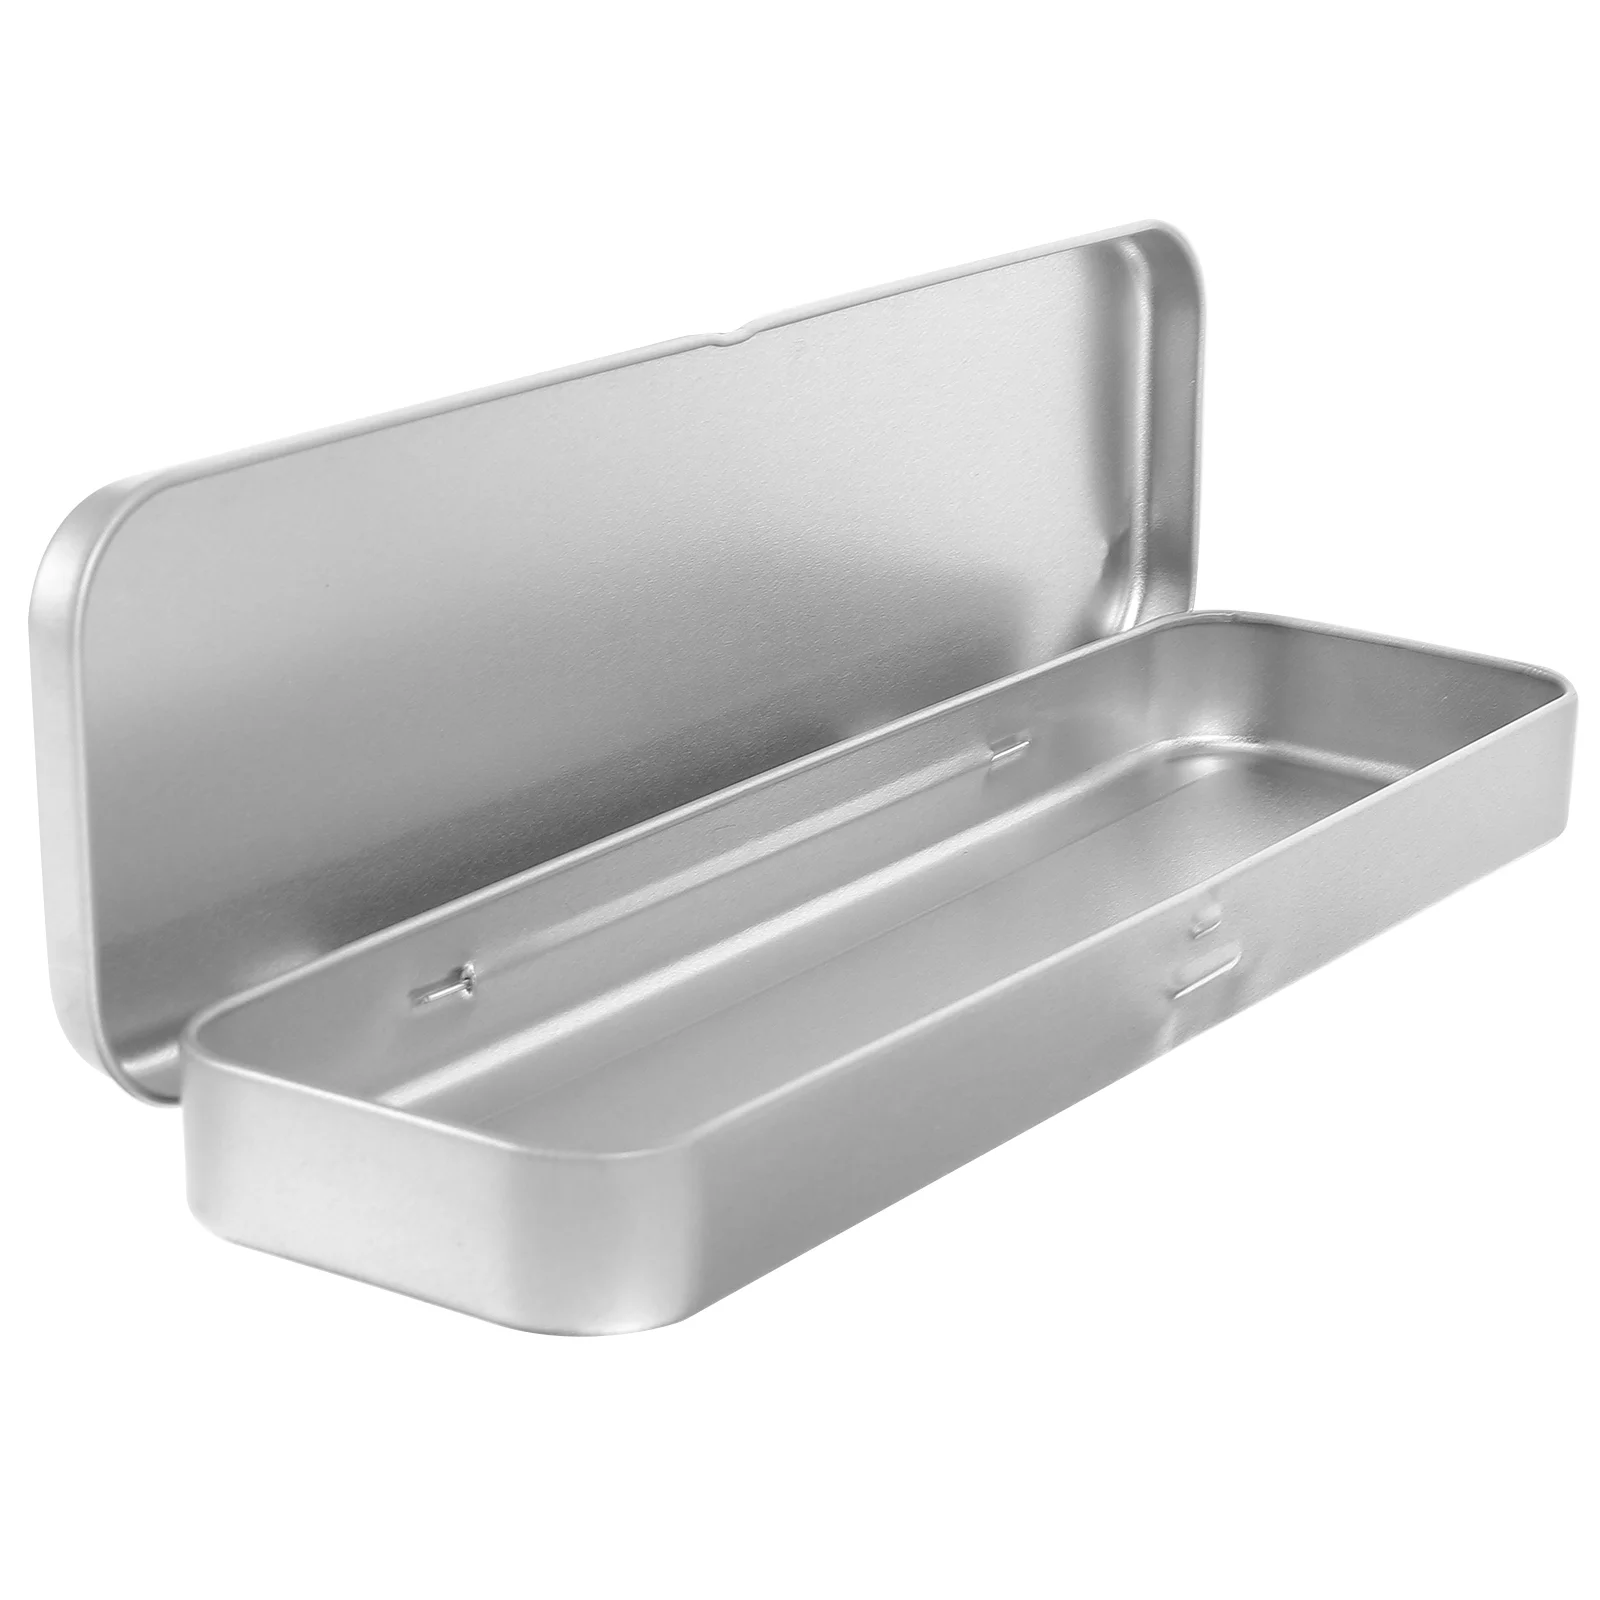 

Metal Pen Case Rectangular Metal Tins Empty Tin Box Hinged Stationery Box Pen Storage Containers for Pen Makeup Brushes Holder